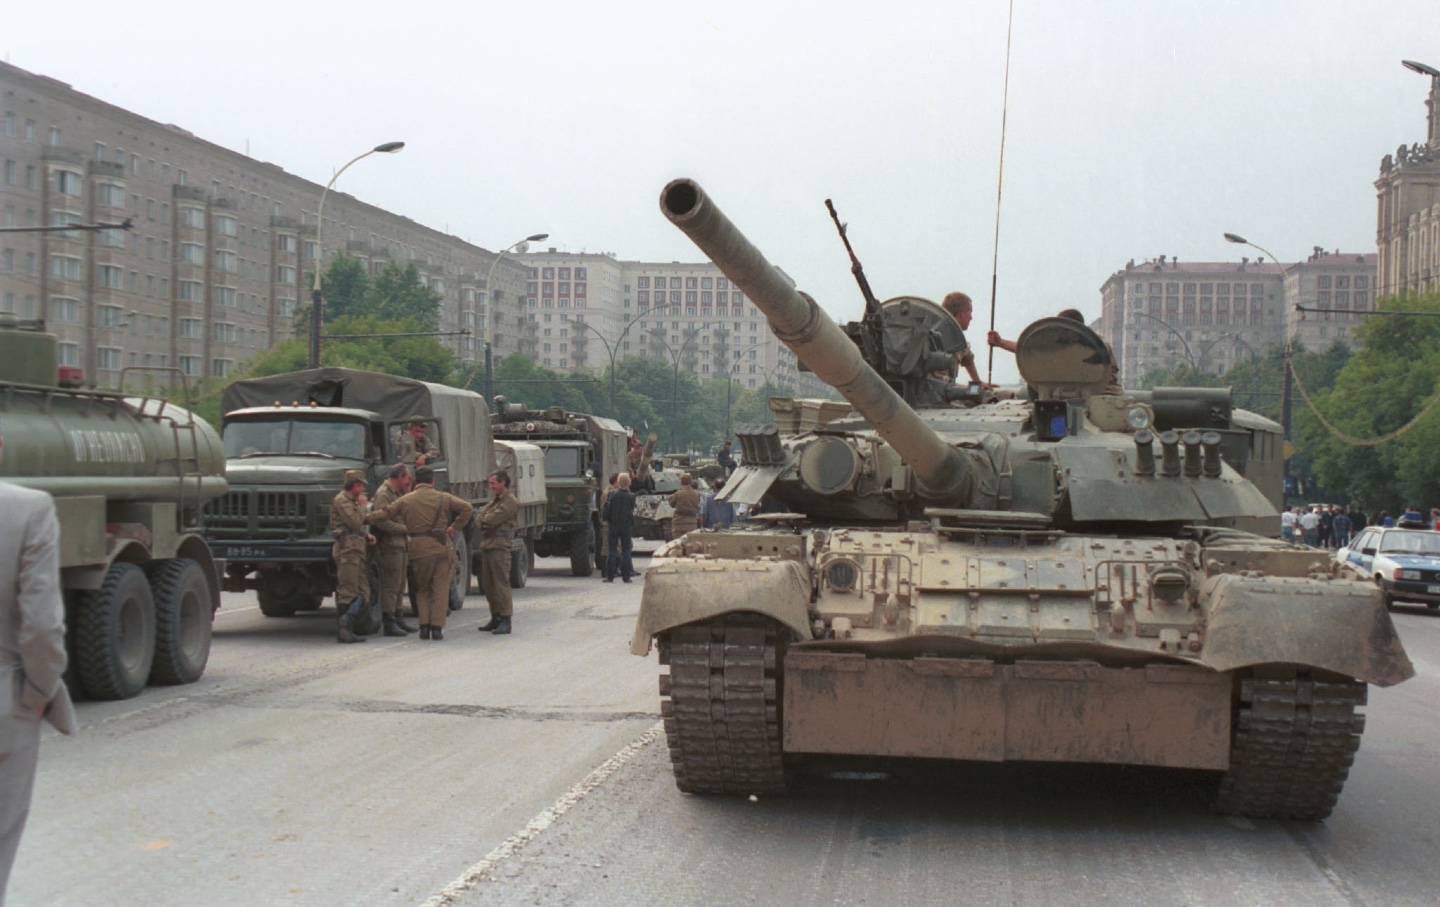 30 Years Ago, the Tanks Rolled Into Moscow—but We Refused to Be Silent